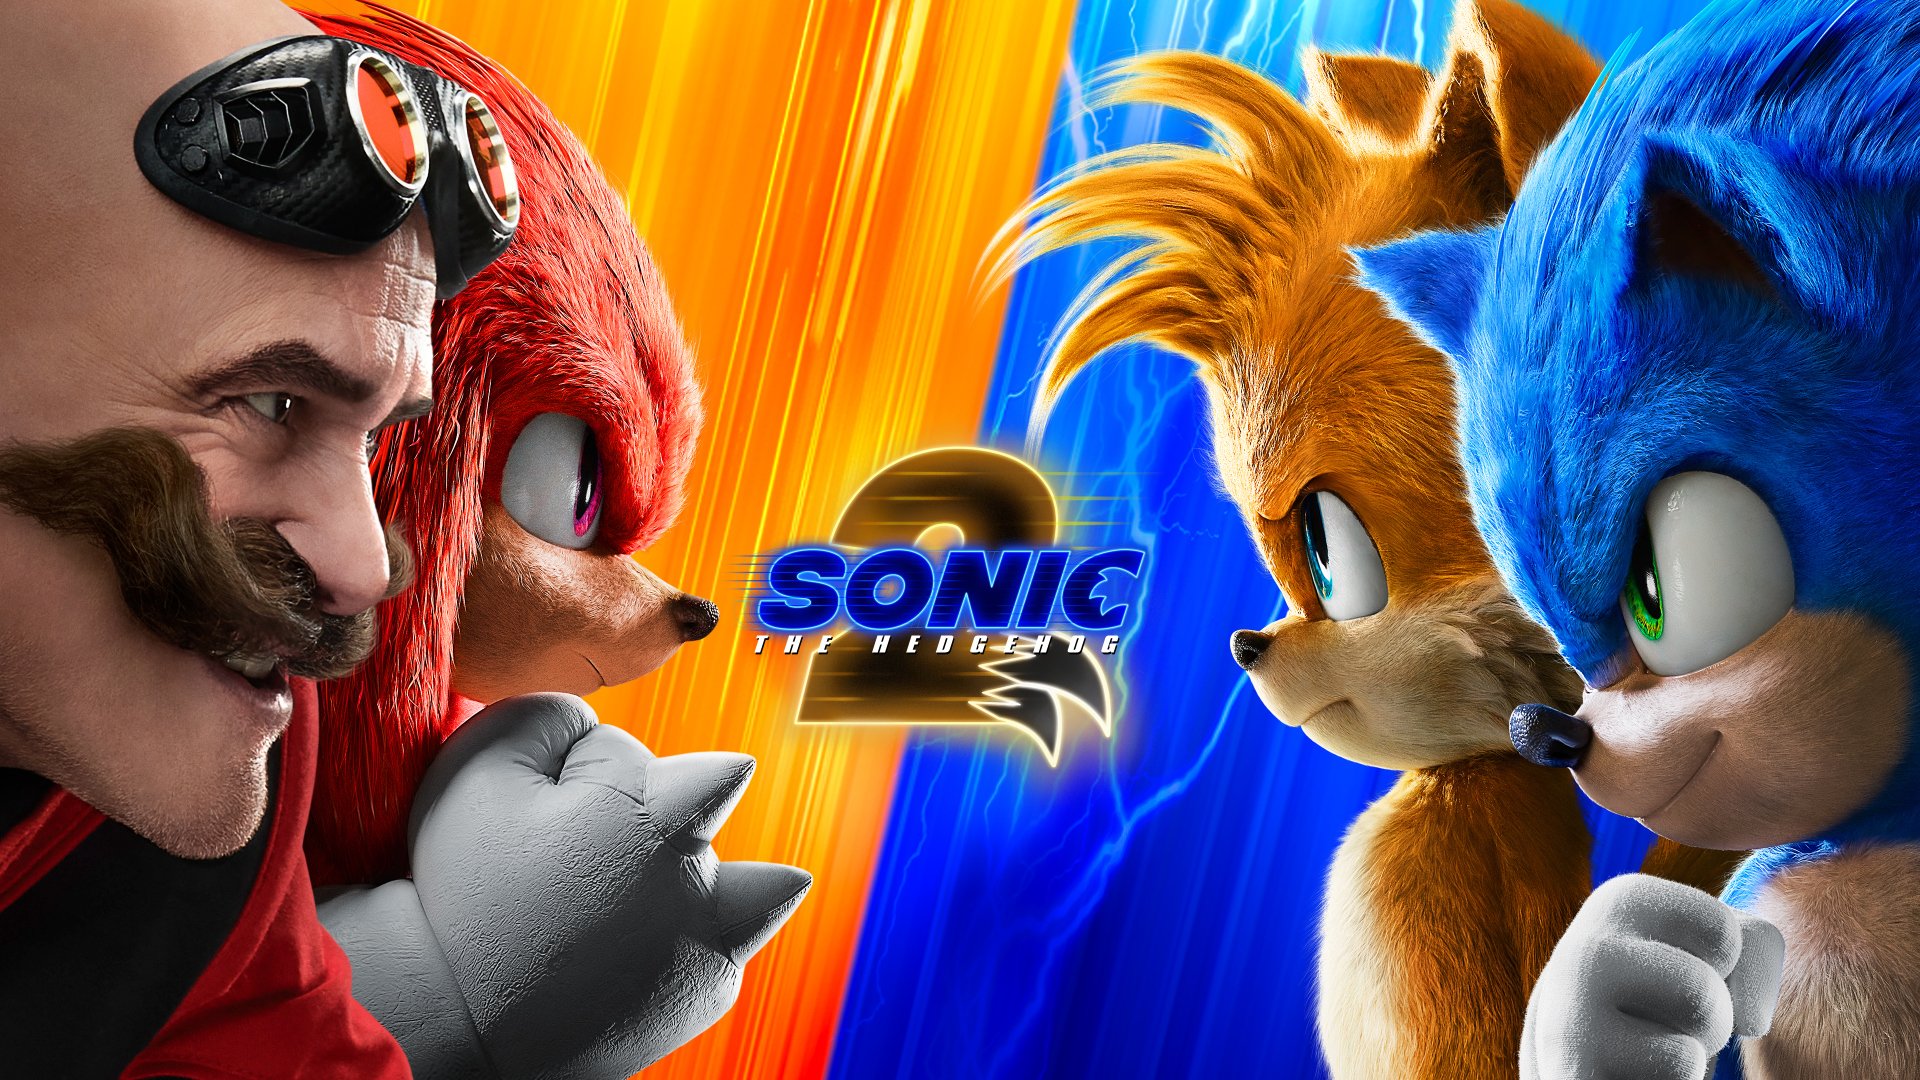 Sonic the Hedgehog 2 latest trailer: Watch now